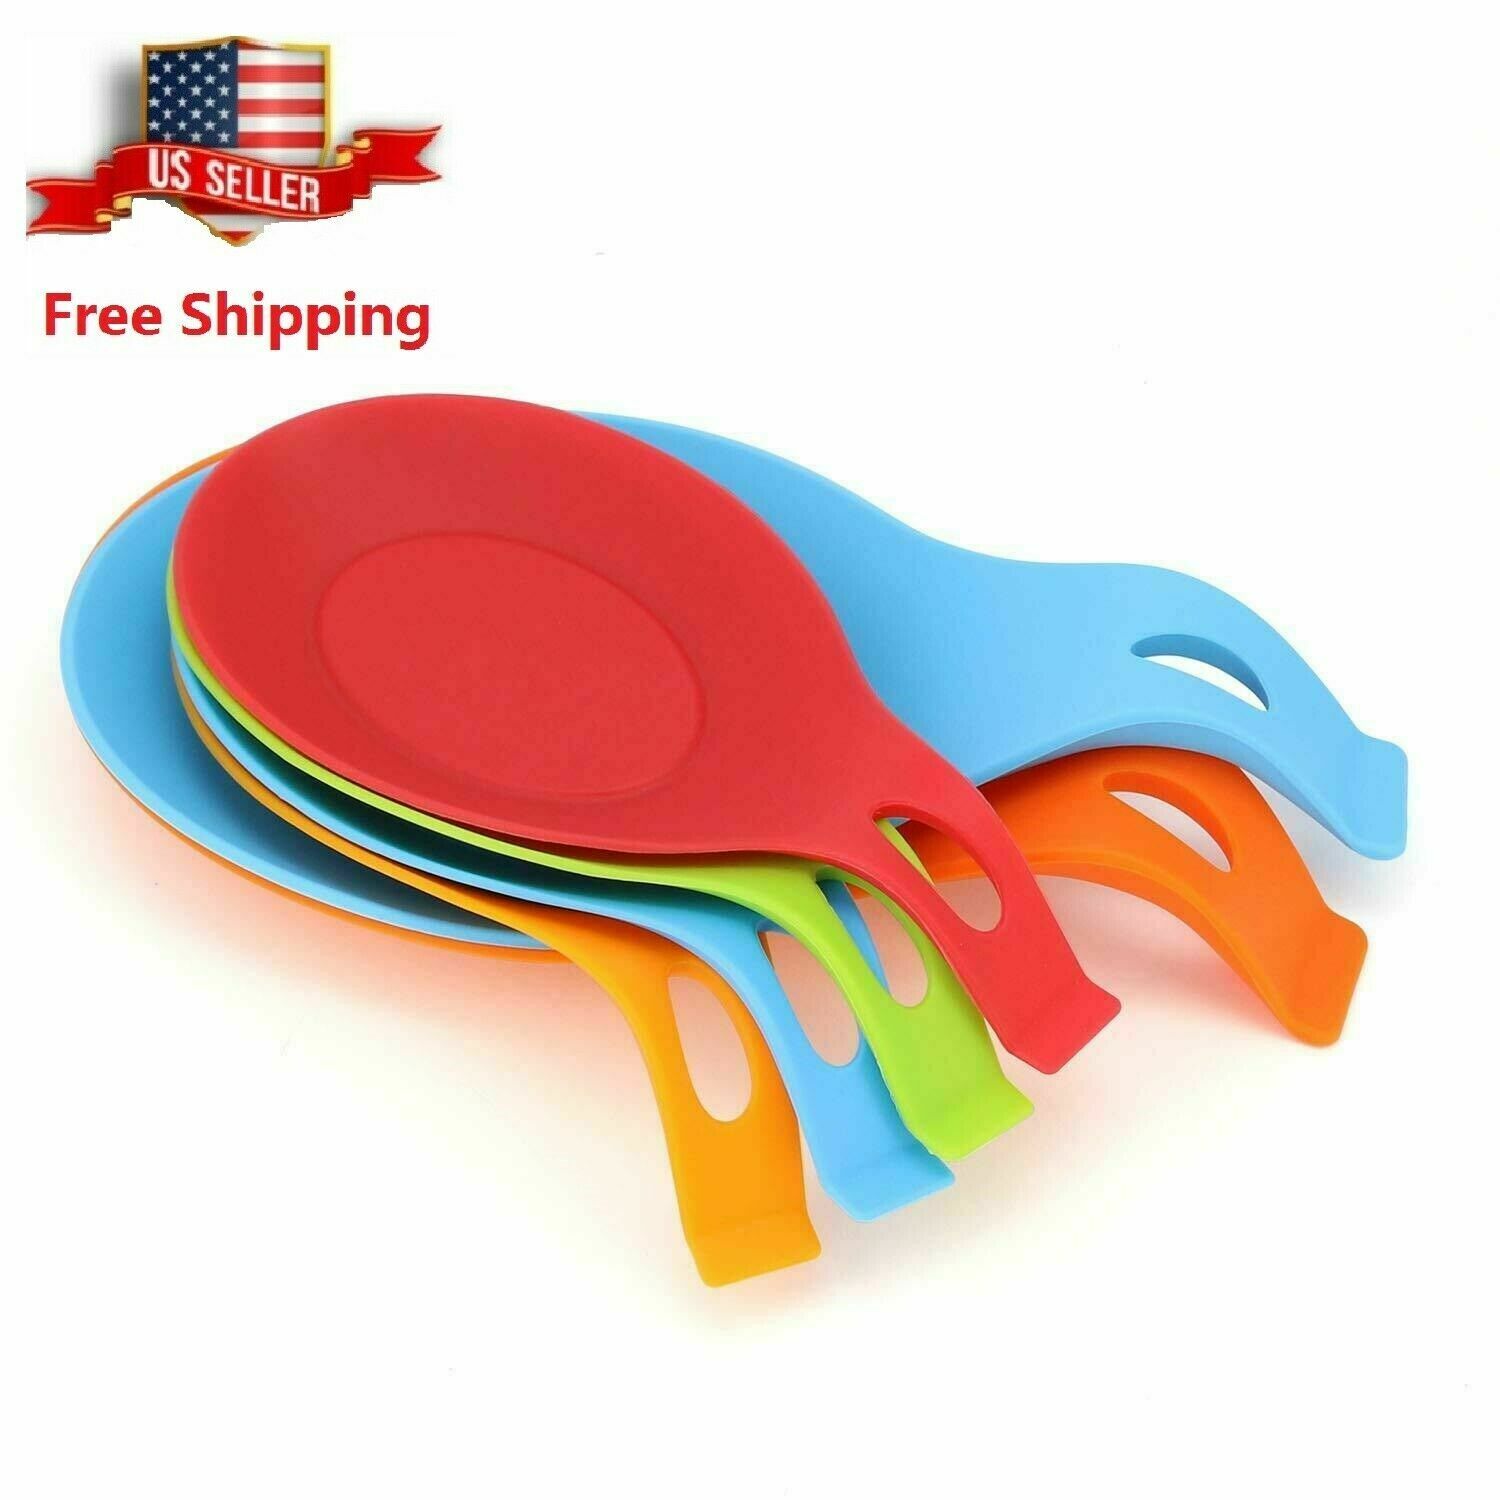 Kitchen Silicone Spoon Rest Heat Resistant Utensil Rest Ladle Spoon Holder 6 Pc